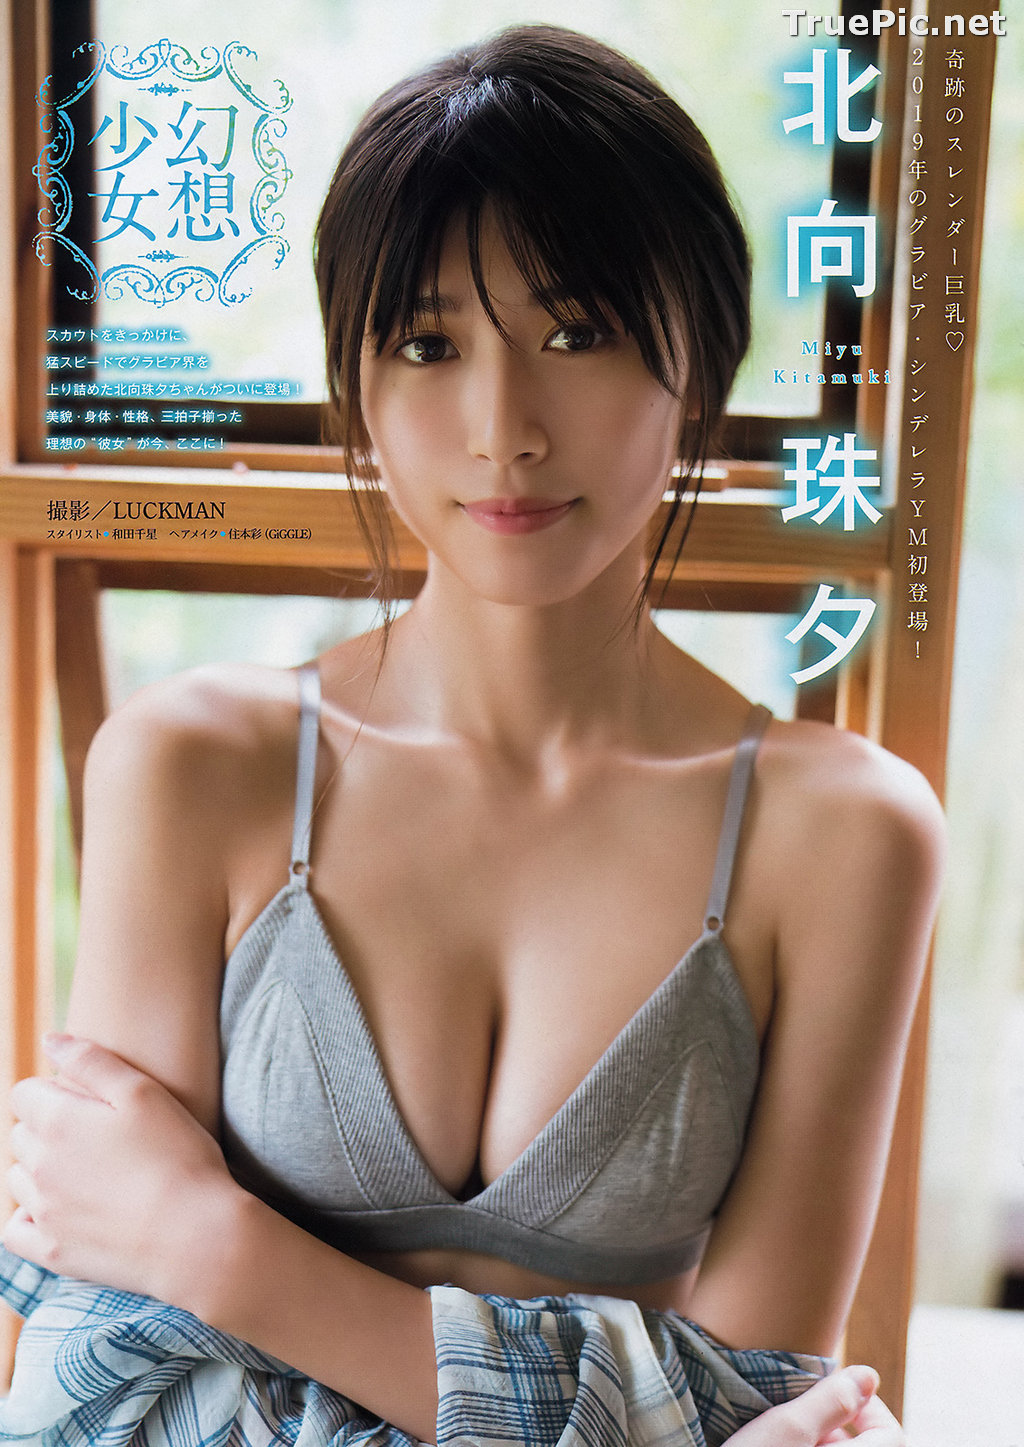 ImageJapanese Gravure Idol and Actress - Kitamuki Miyu (北向珠夕) - Sexy Picture Collection 2020 - TruePic.net - Picture-148